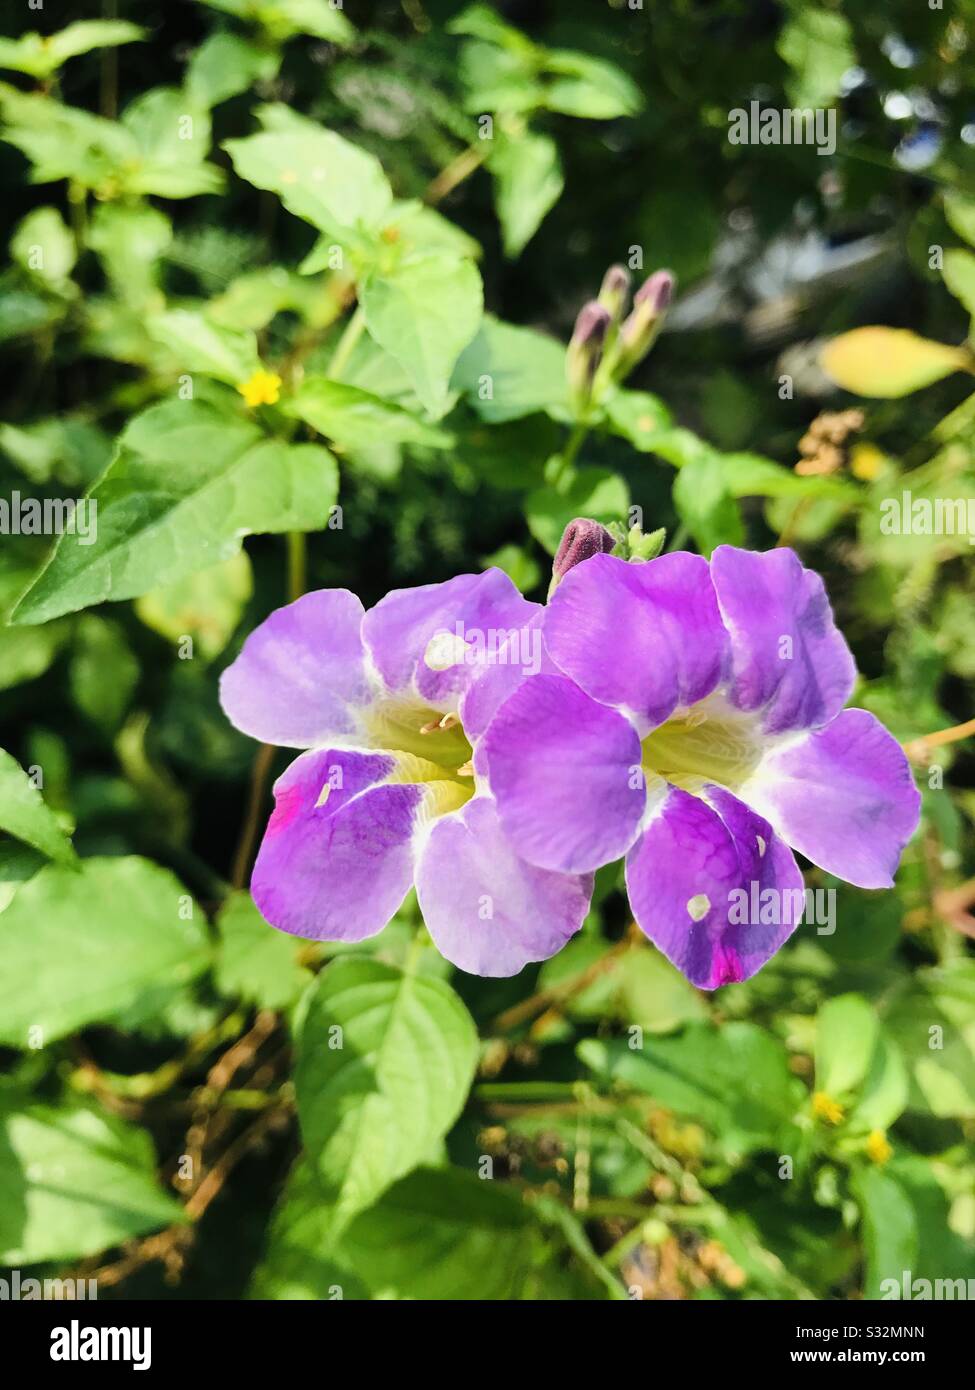 Asystasia Gangetica aka Coromandel-Purple colour twin flowers in a shrub near Aliyar dam, looks closely found some natural white dots on petals and colour shades on petals Stock Photo